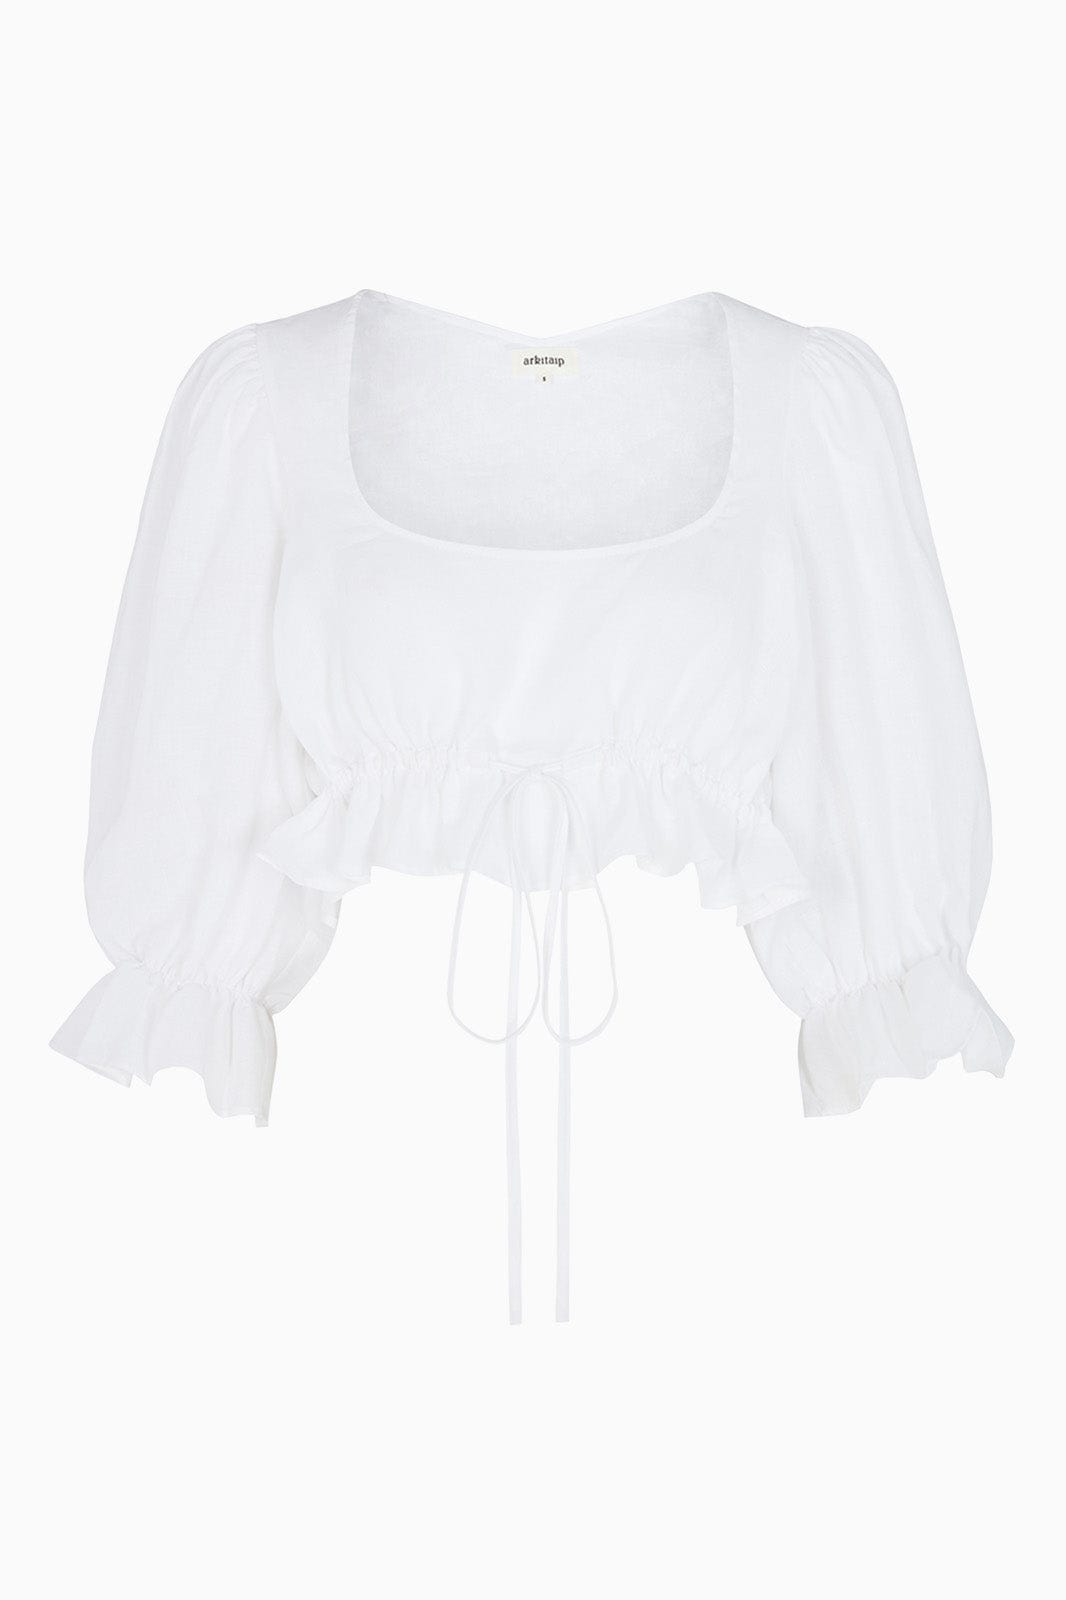 arkitaip Tops The Carla Puffed Sleeves Blouse in white